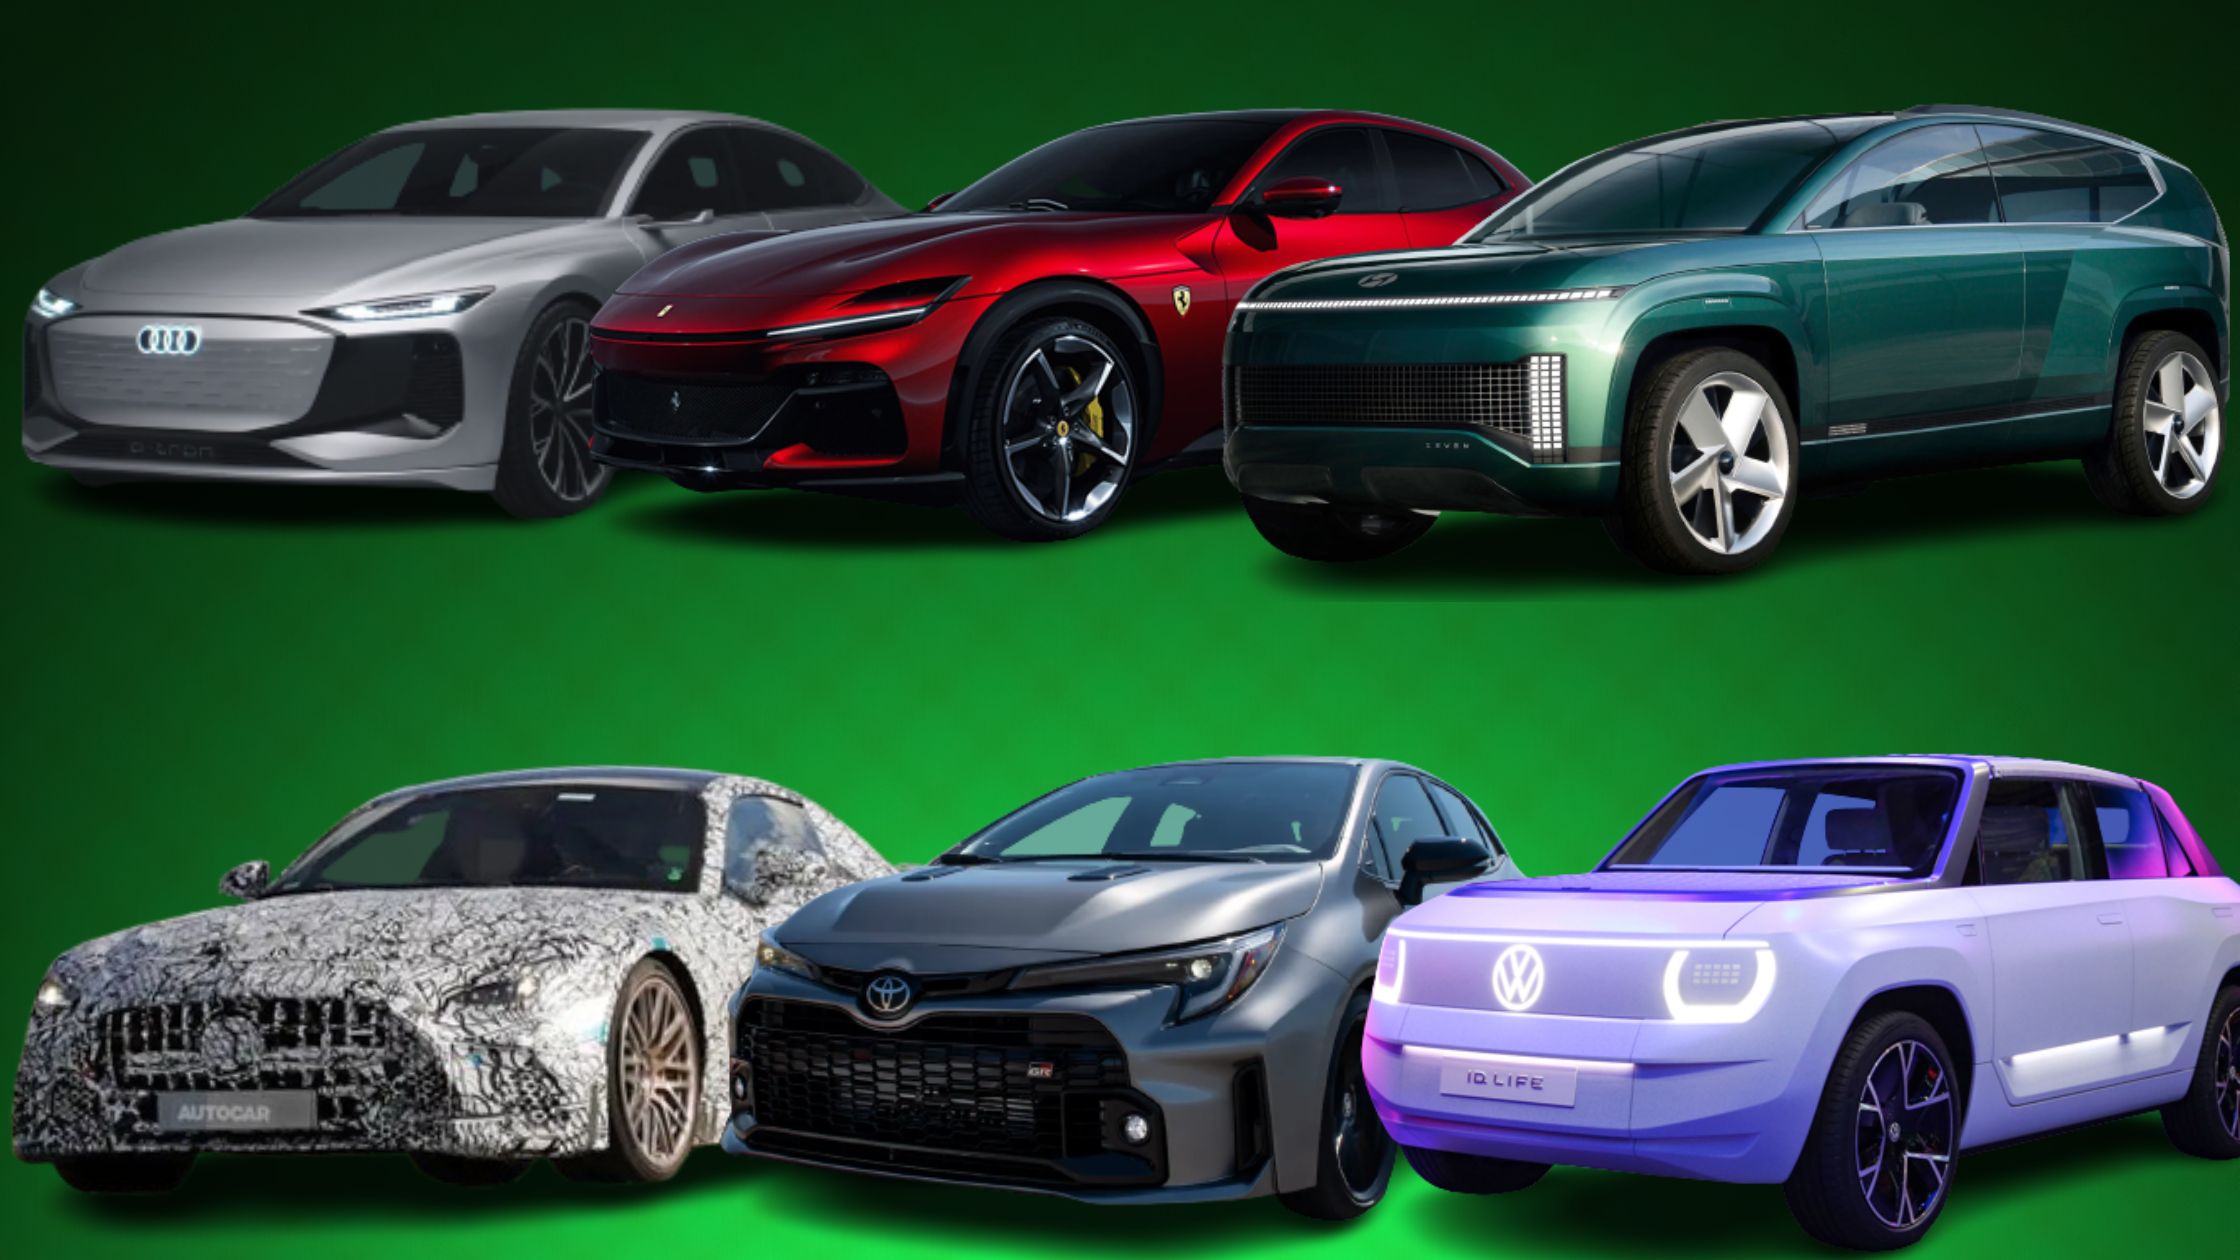 Amazing Cars To Look Out For In 2023 - RNN